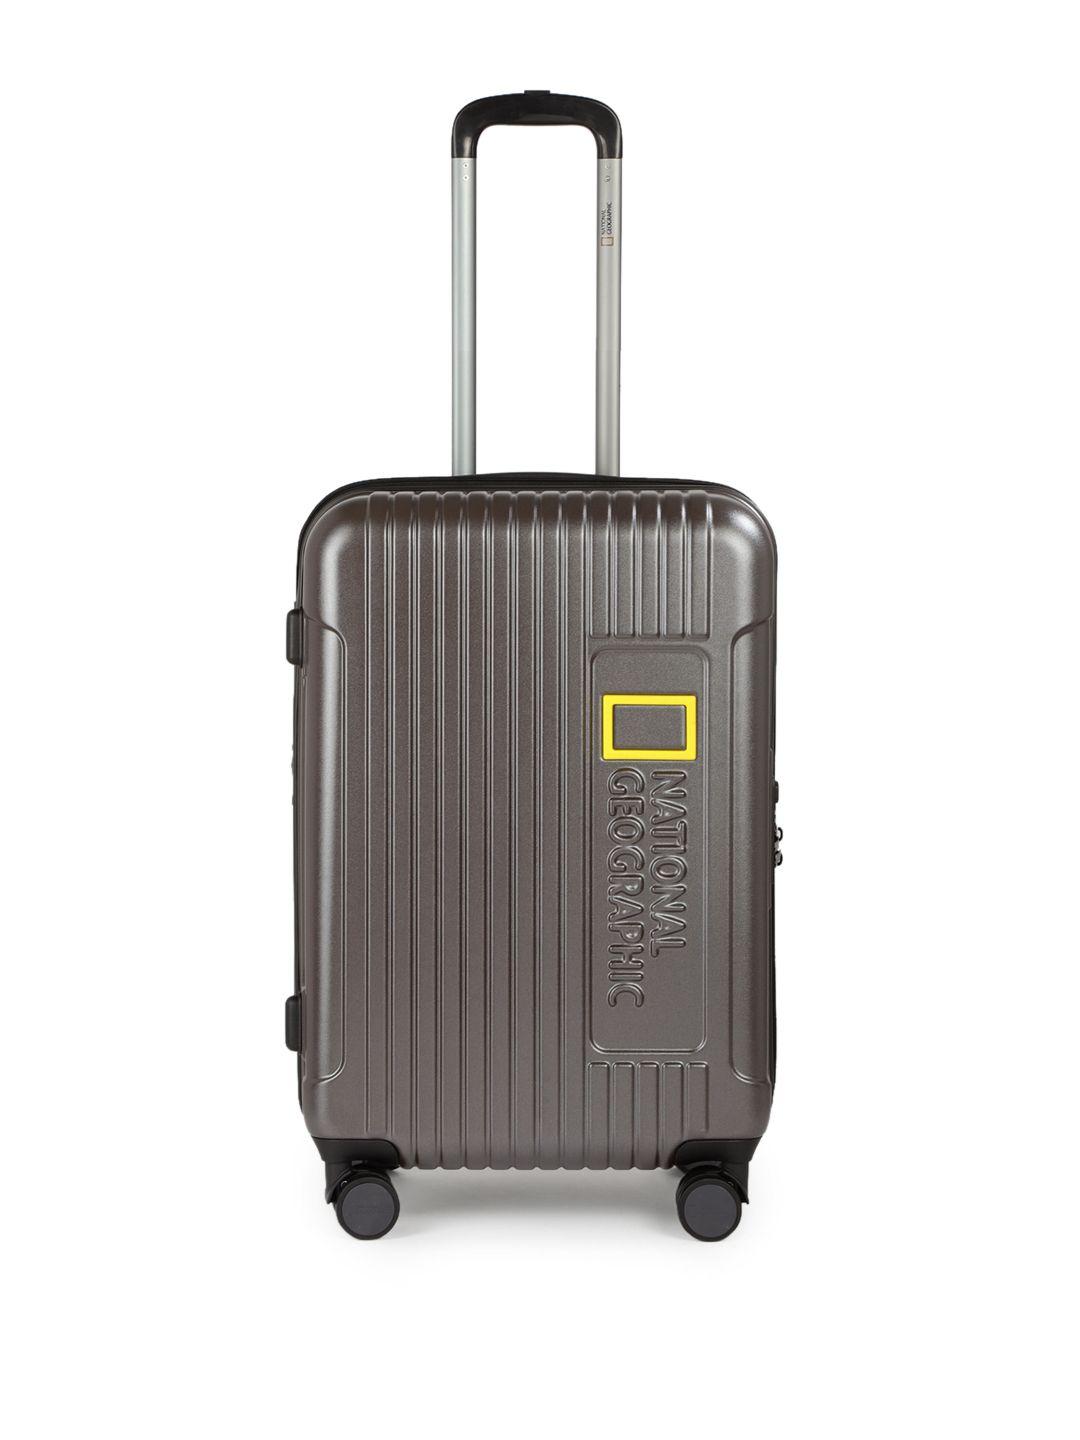 national geographic gunmetal-toned 4 wheels medium check-in luggage